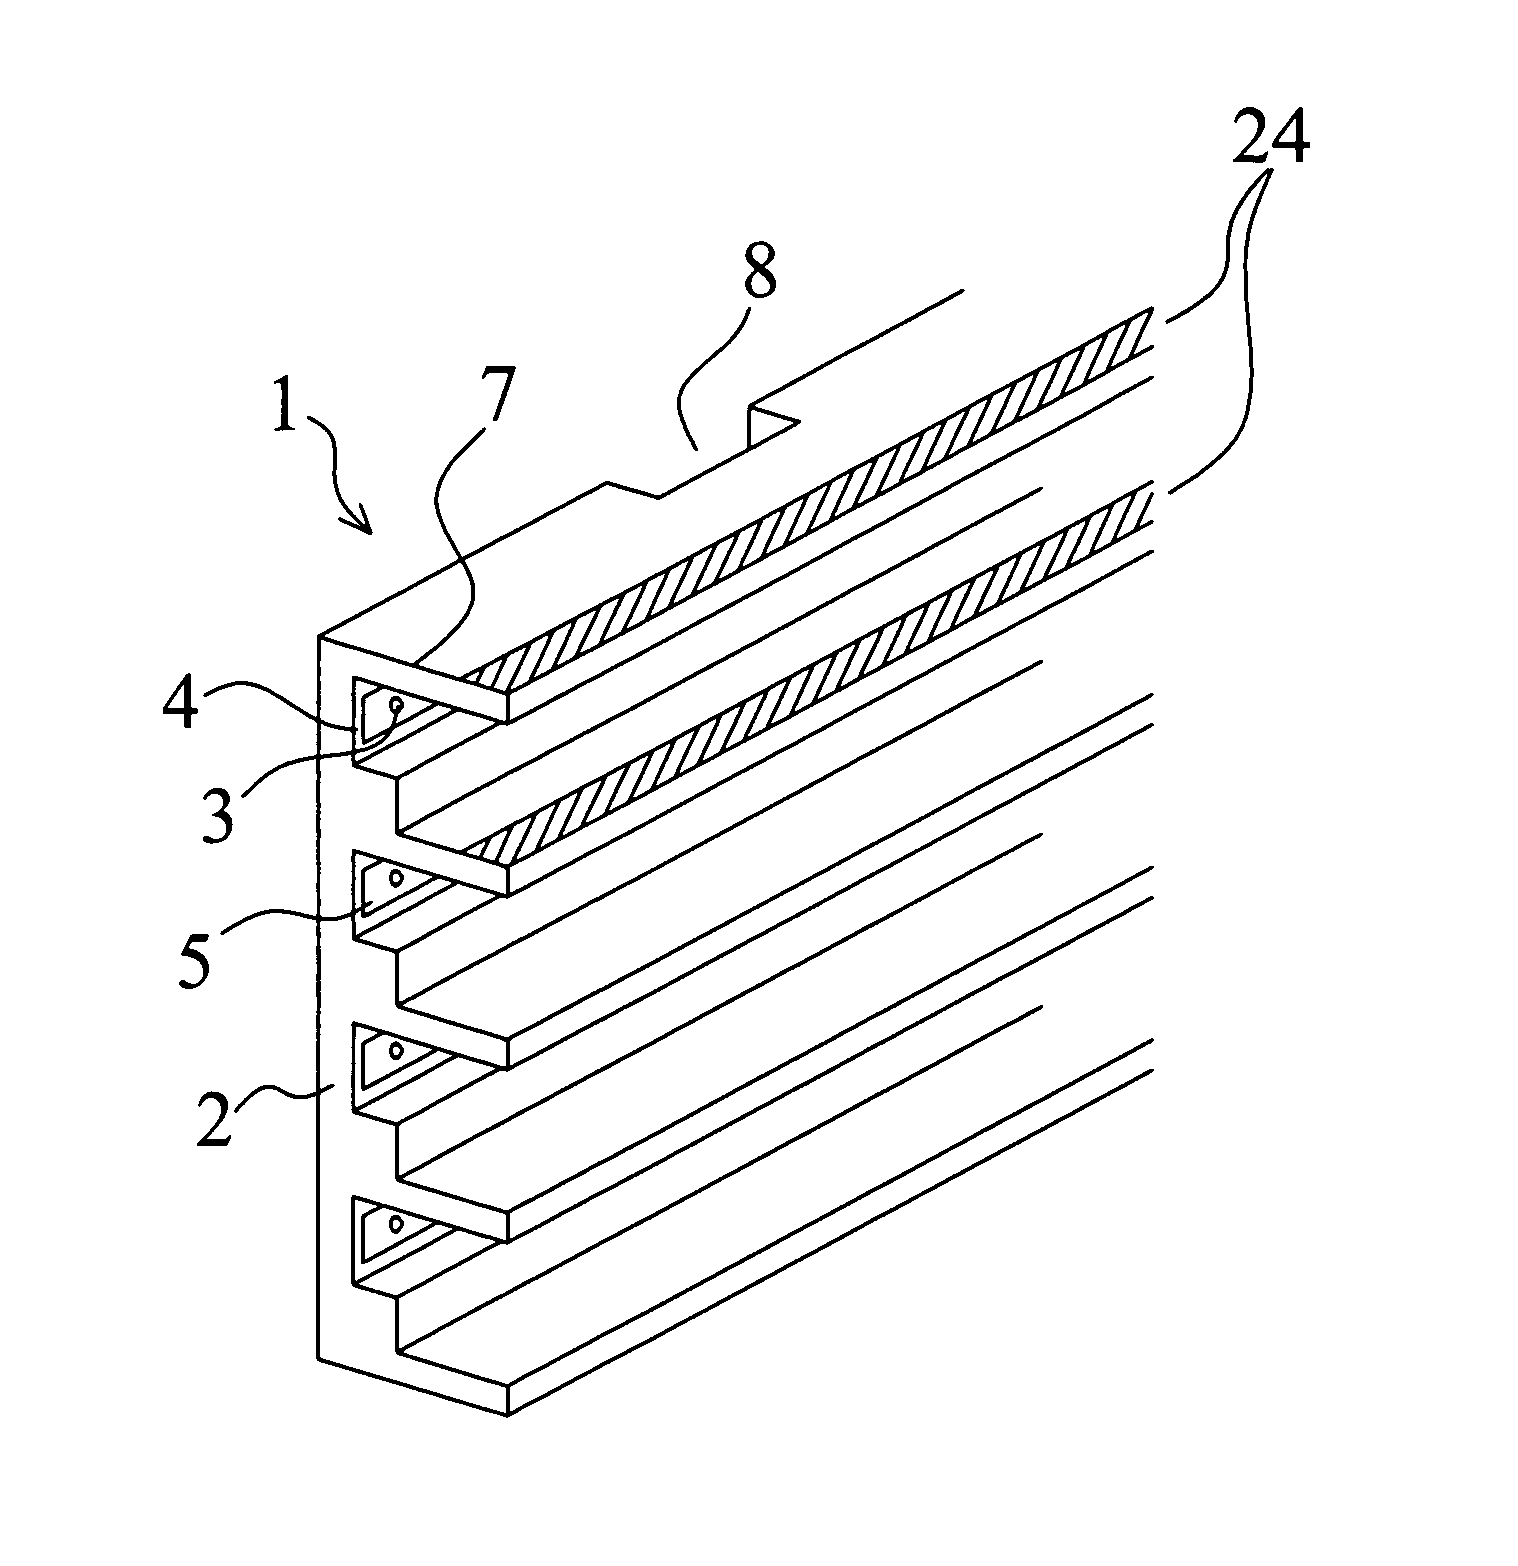 Light emitting array apparatus and method of manufacture